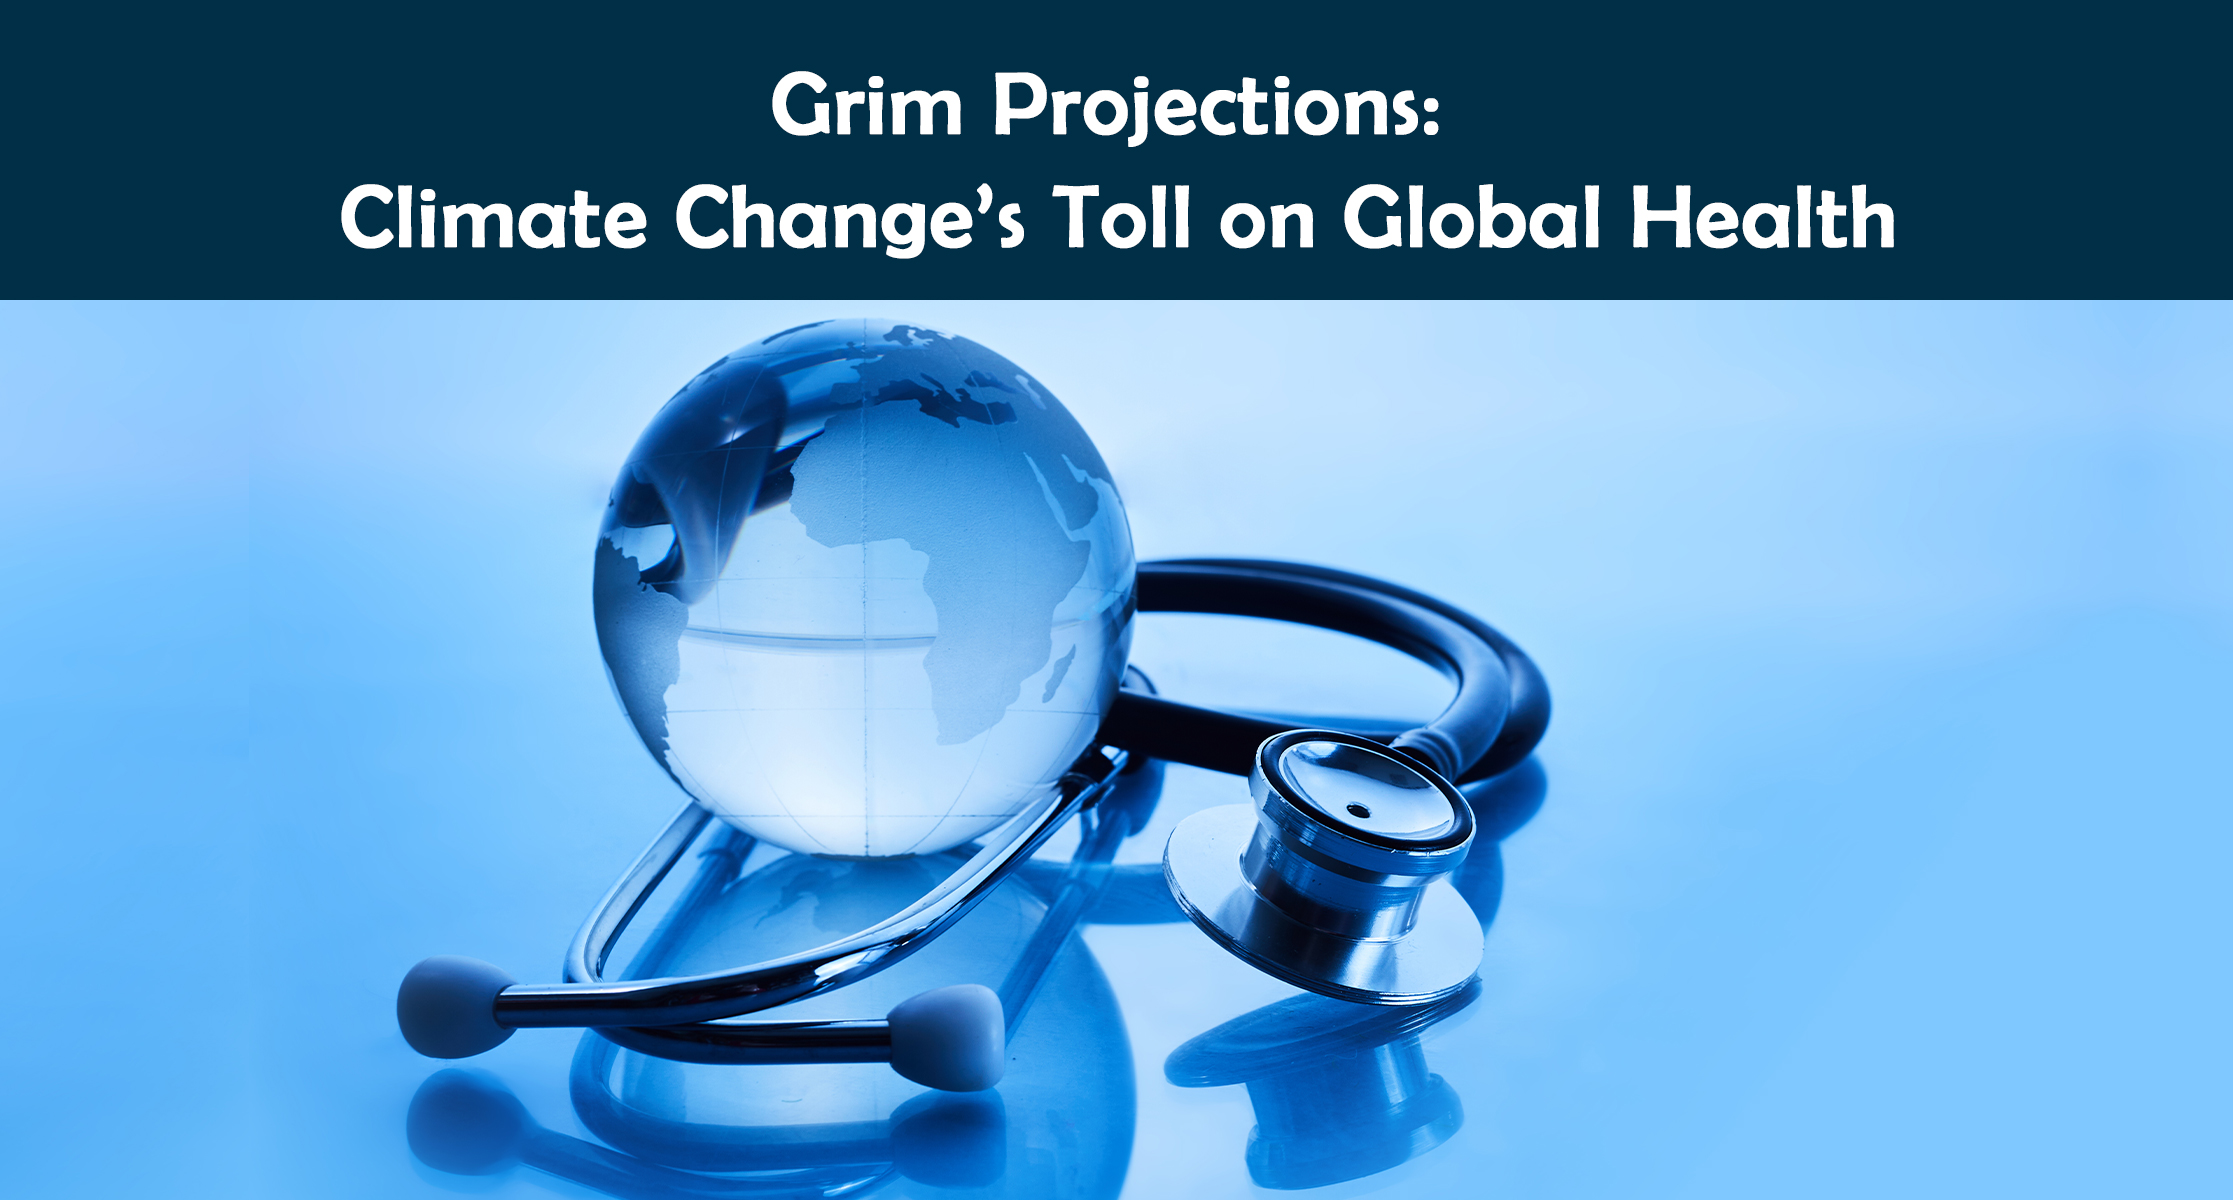 Grim Projections: Climate Change’s Toll on Global Health